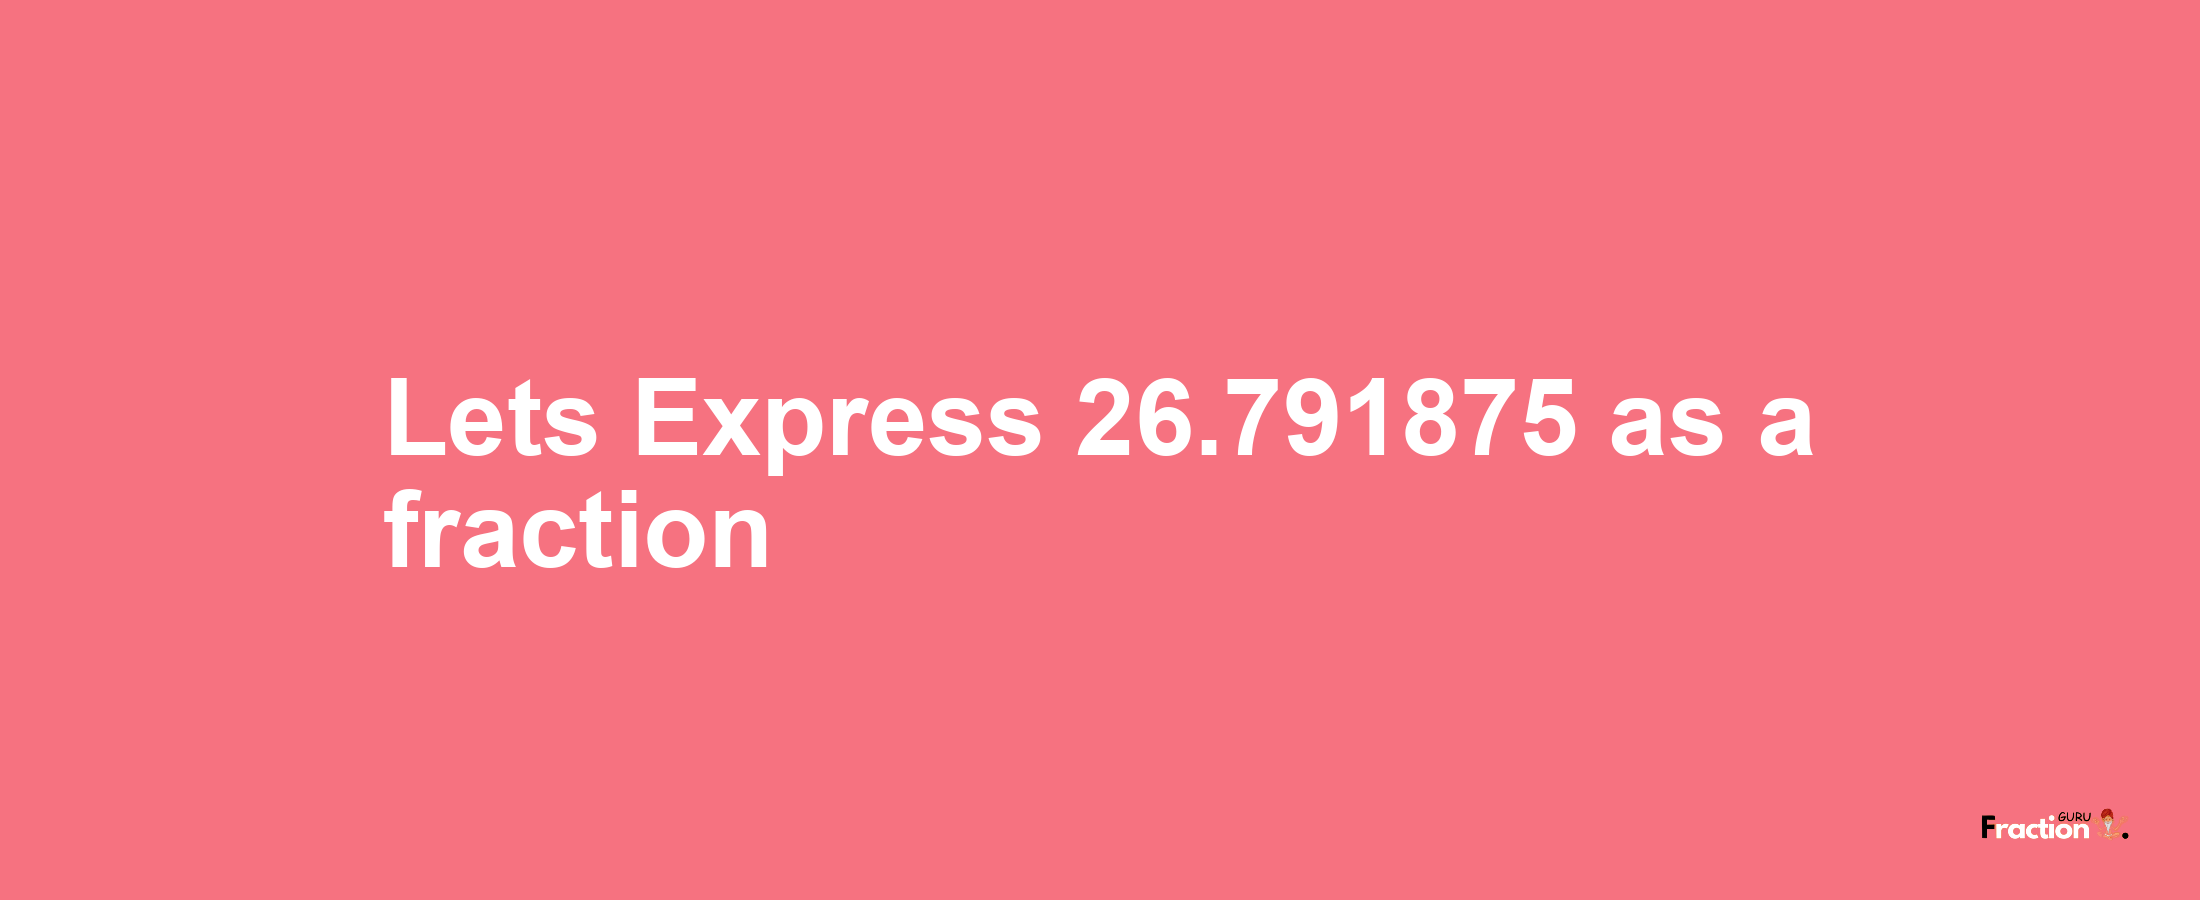 Lets Express 26.791875 as afraction